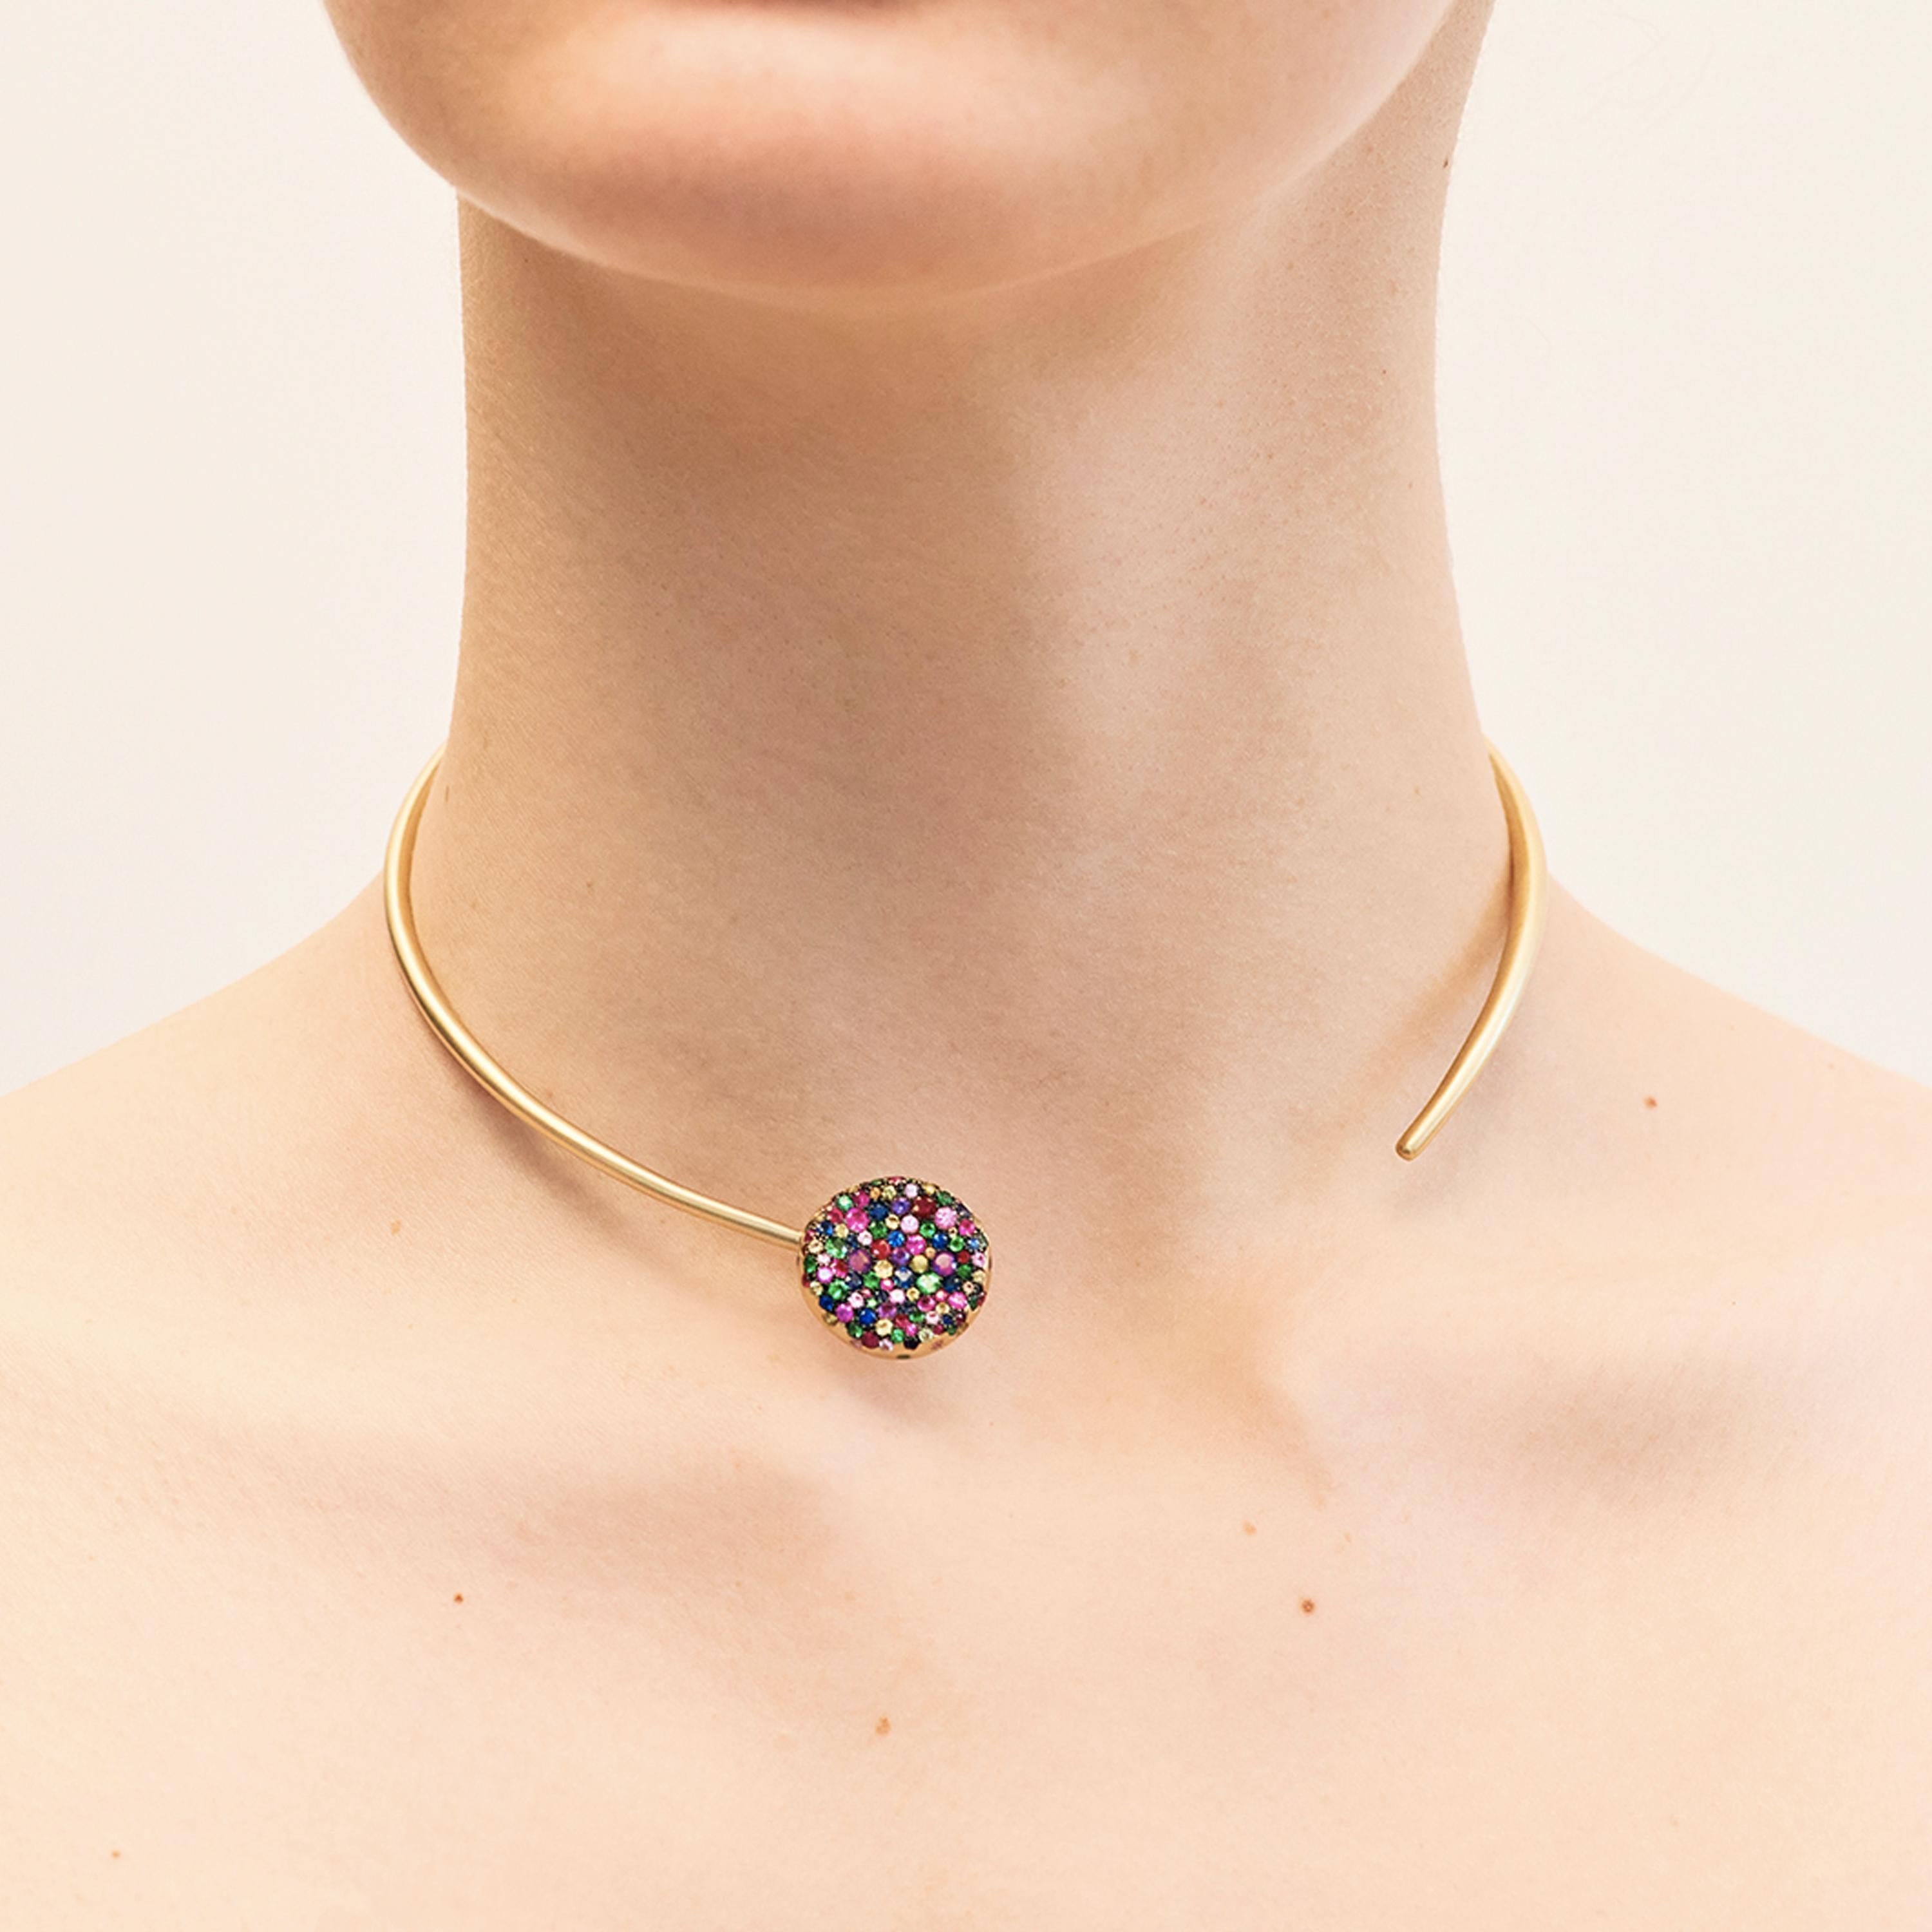 Nada Ghazal's beautiful chocker is crafted from 18 karat gold, and coloured with 2.90 carats of multi colored sapphires, amethysts and tsavorites (blue, pink, purple, orange, yellow, green).
 
While Nada Ghazal's pieces are in essence deeply